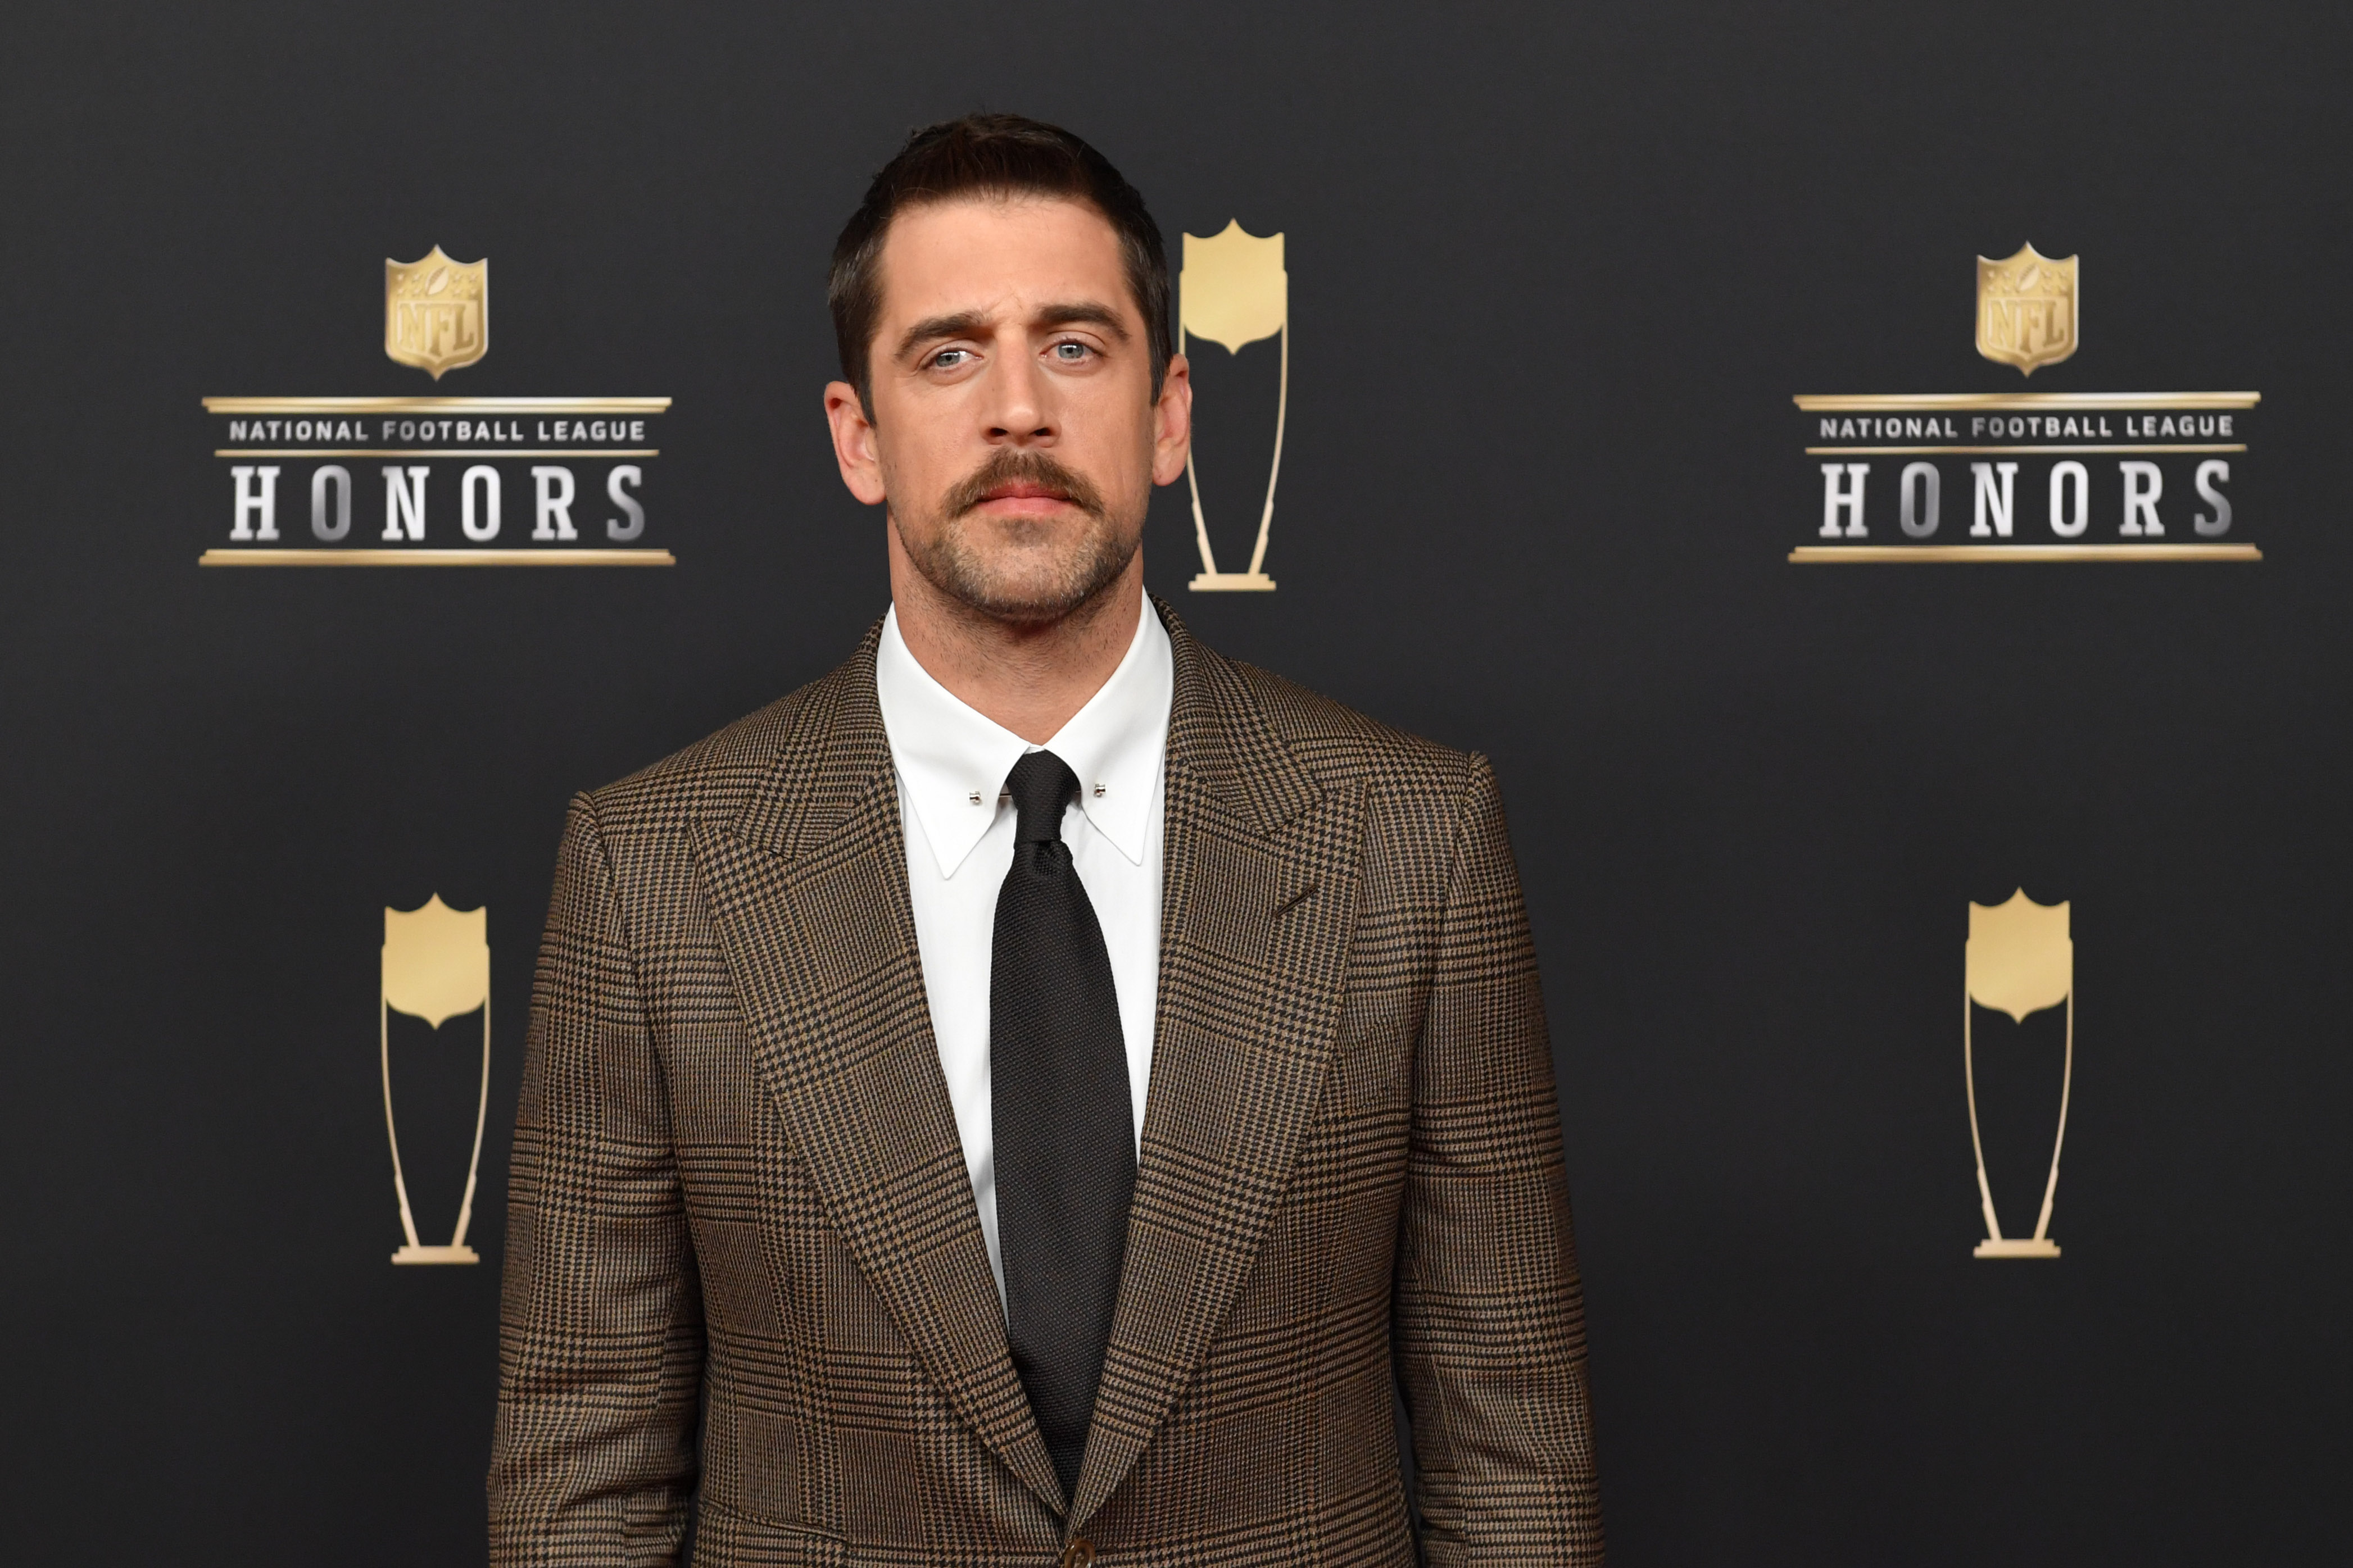 Aaron Rodgers at some awards show